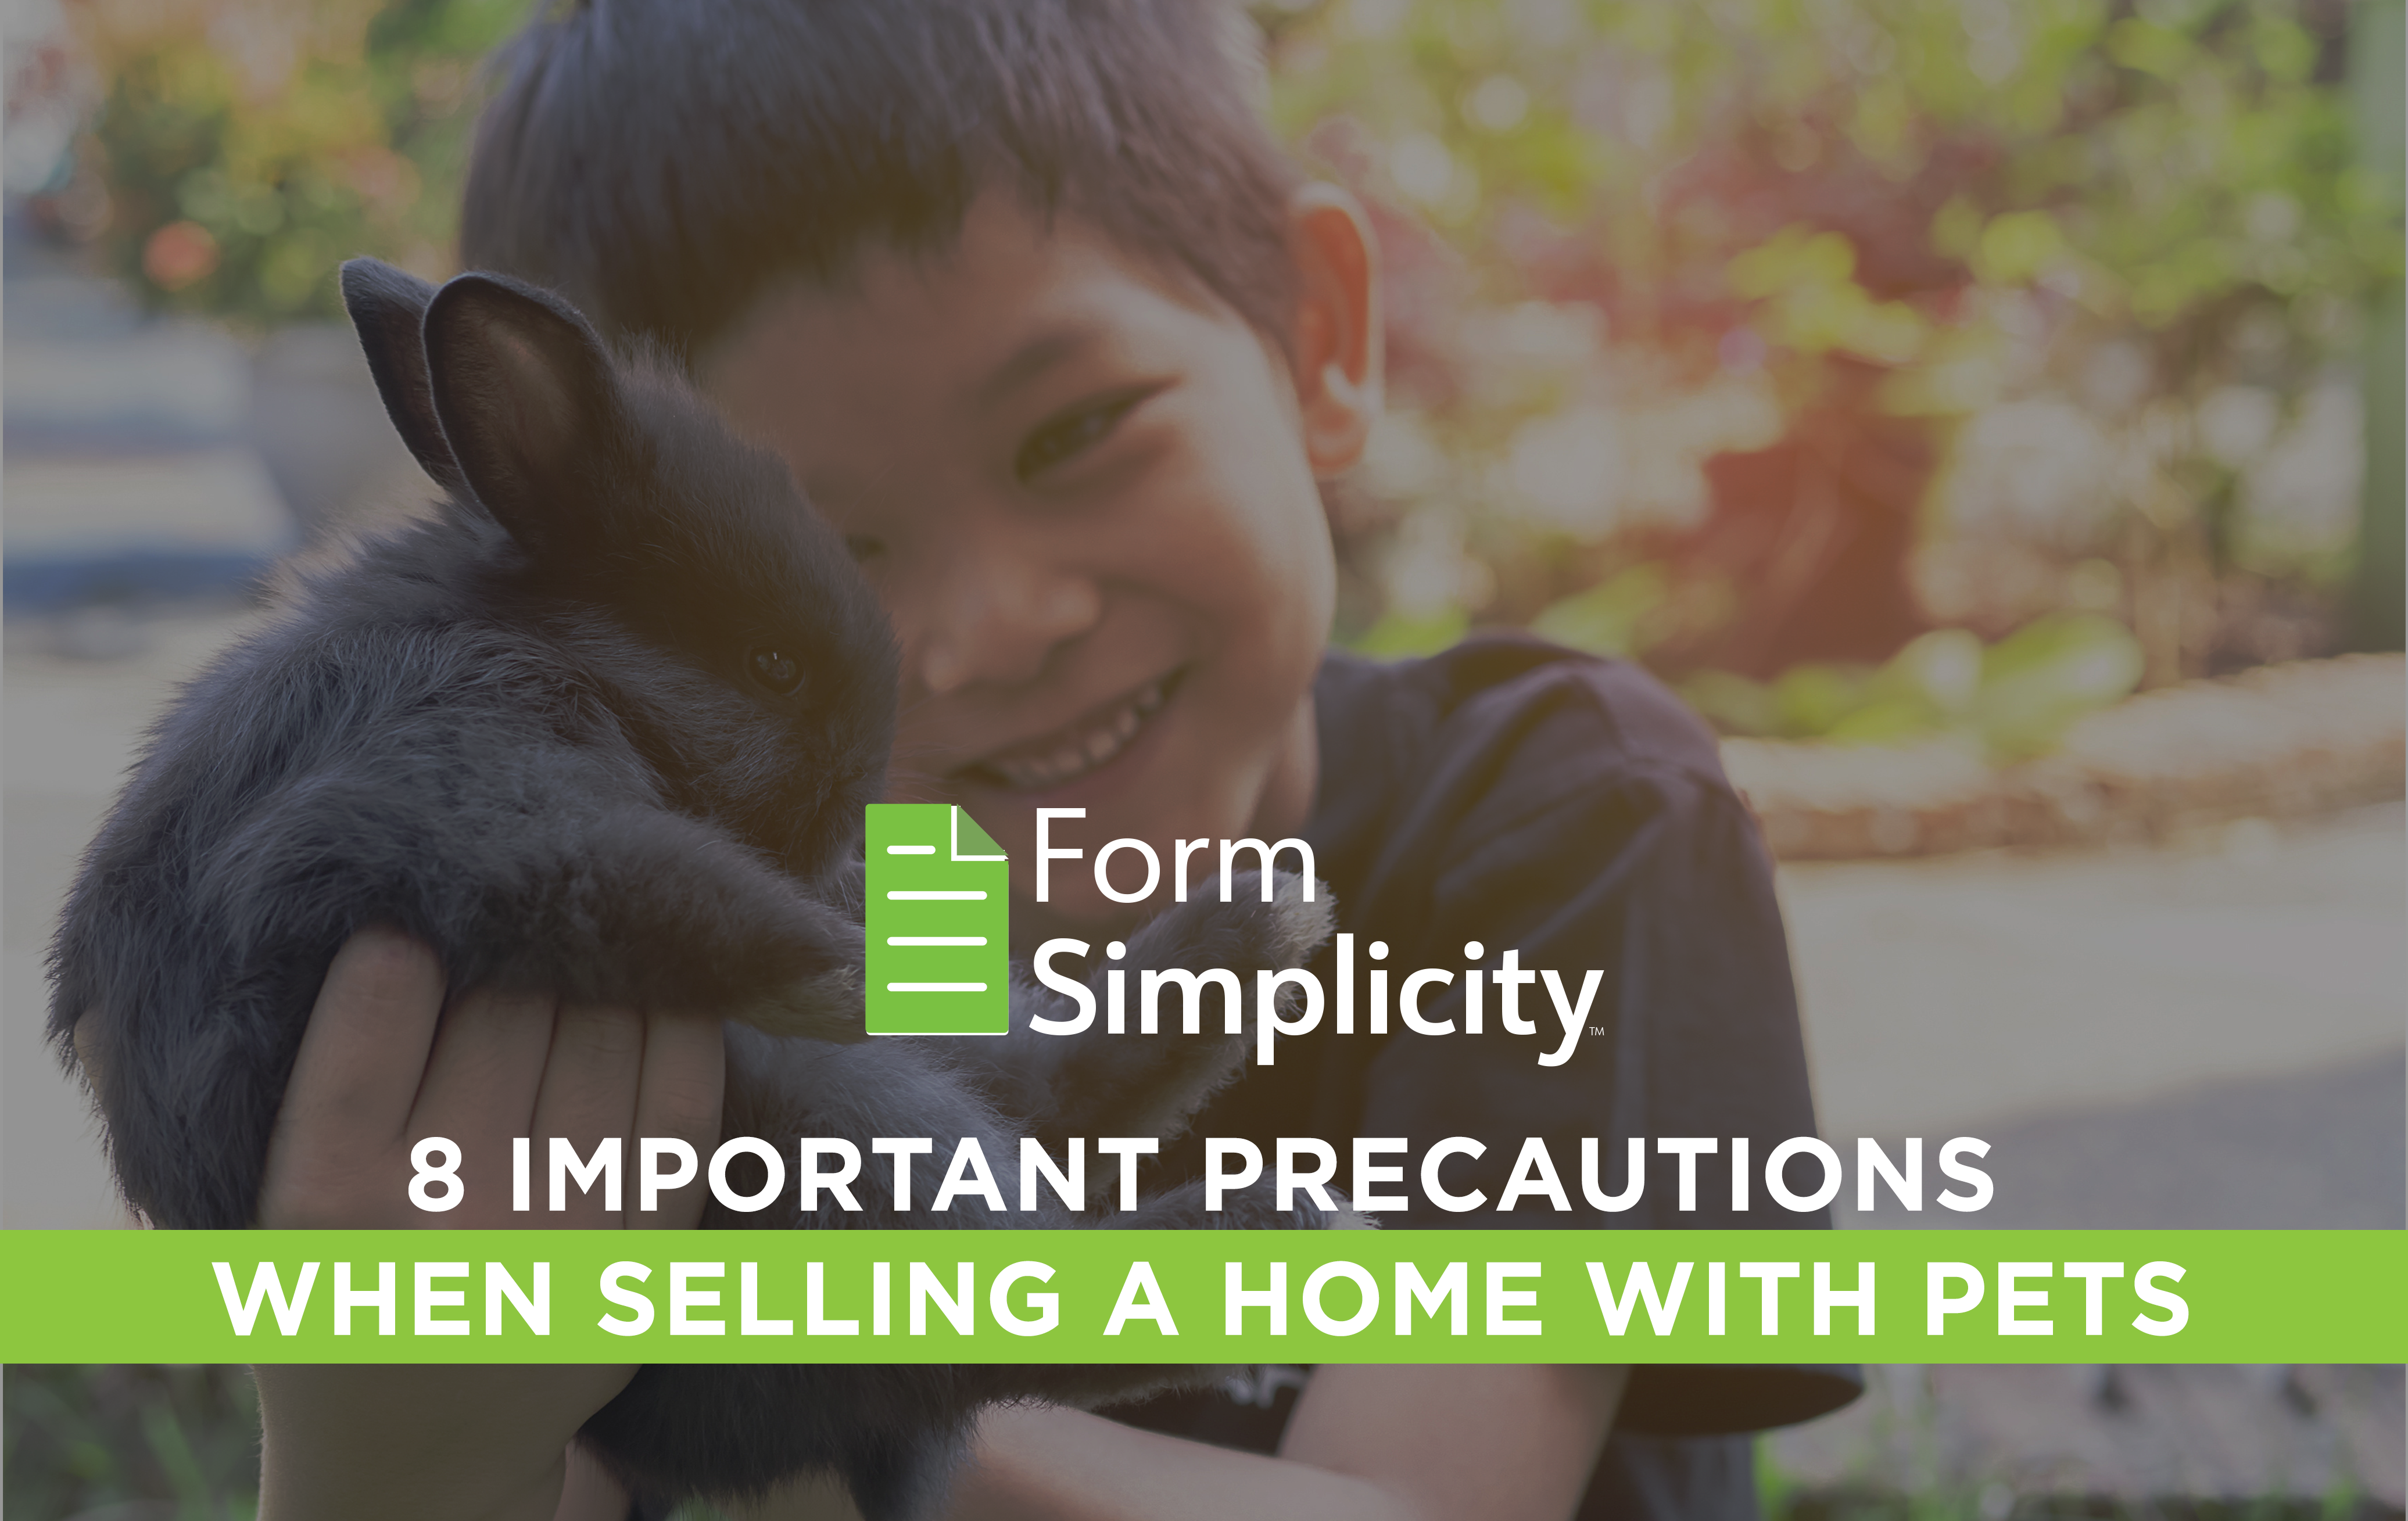 Important Precautions When Selling a Home With Pets, Cats, Dogs, Birds, Snakes, or Whatever Animal Resides Within the Home